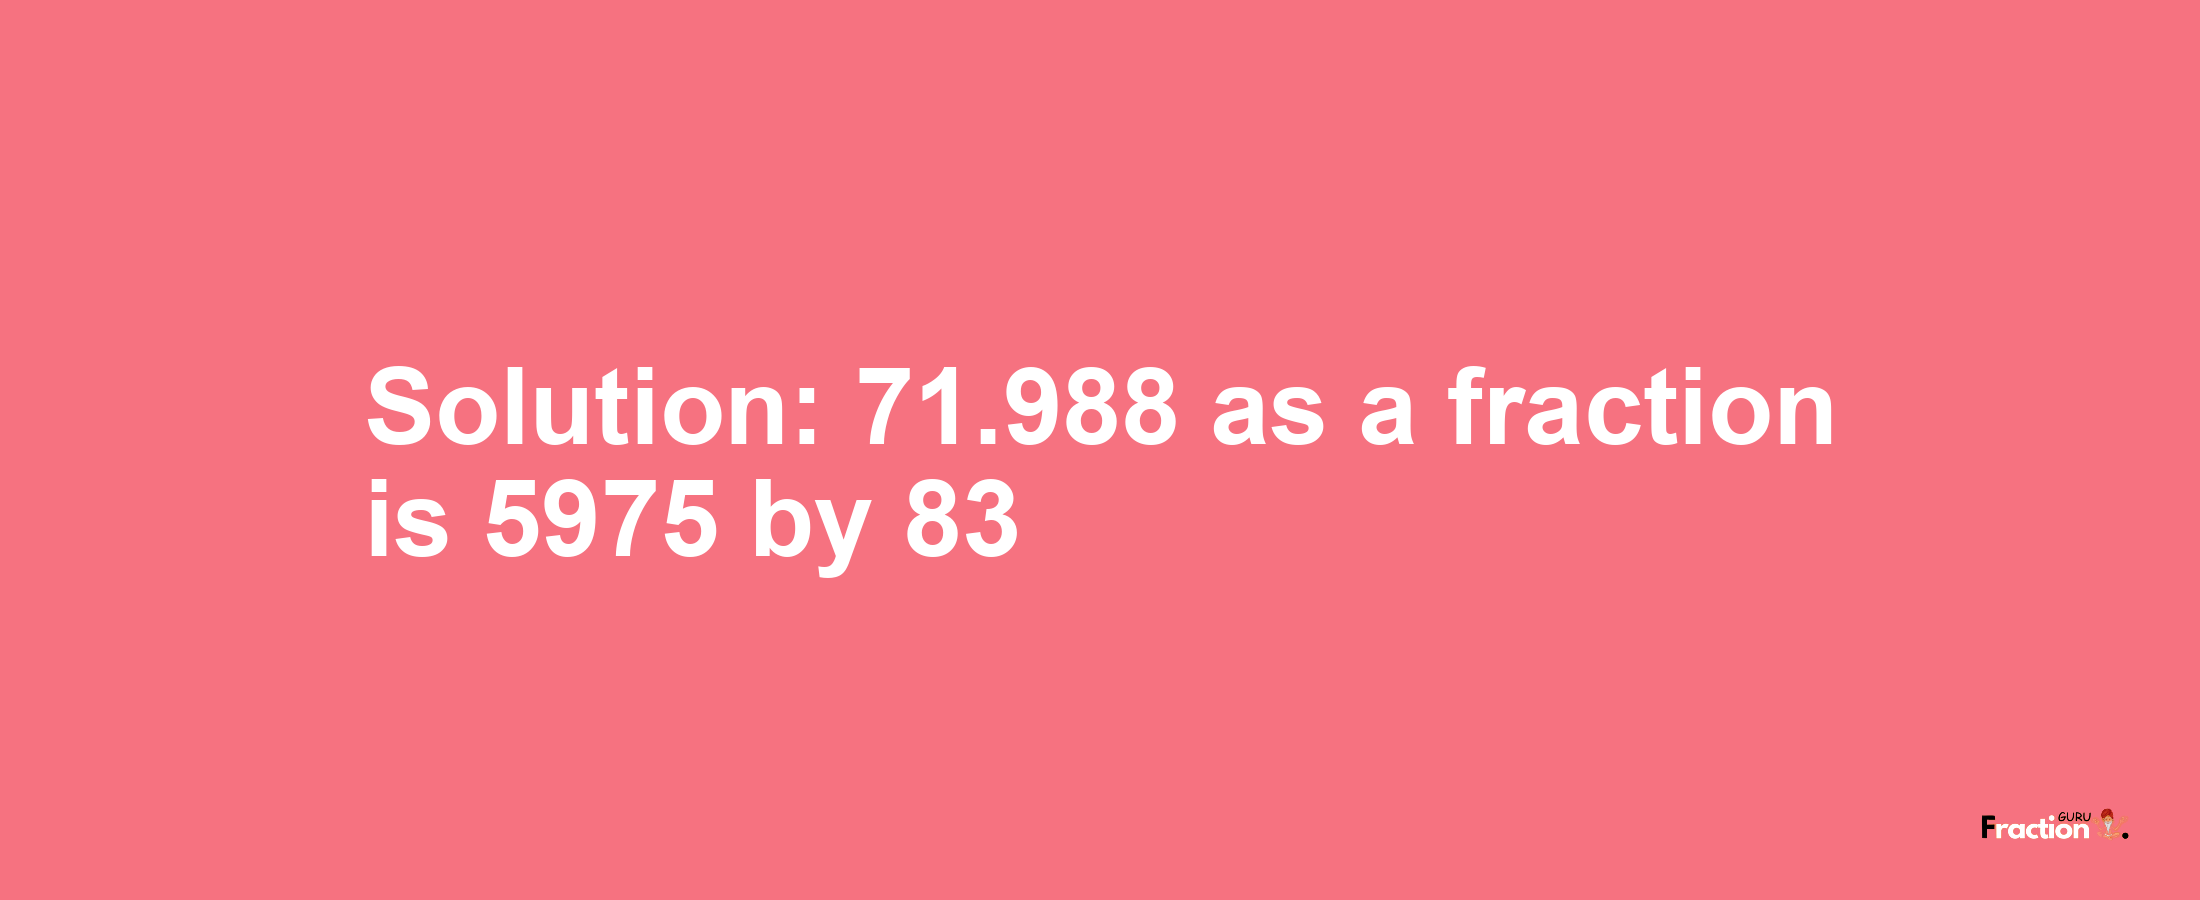 Solution:71.988 as a fraction is 5975/83